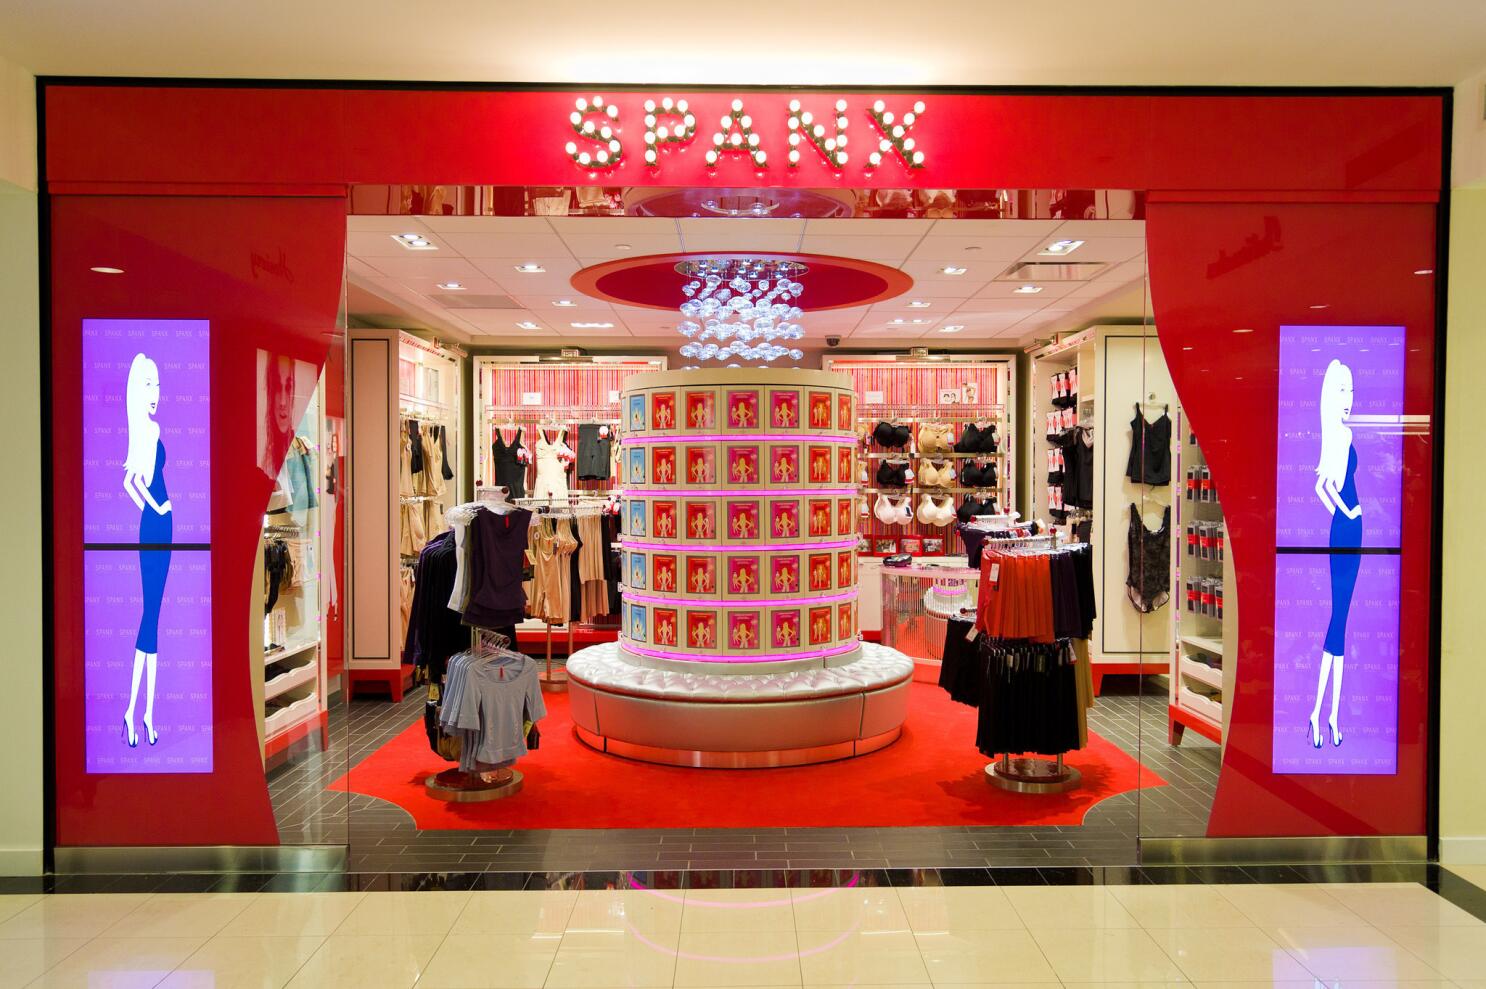 SPANX - Our newest Spanx store in Natick Mall opens in one